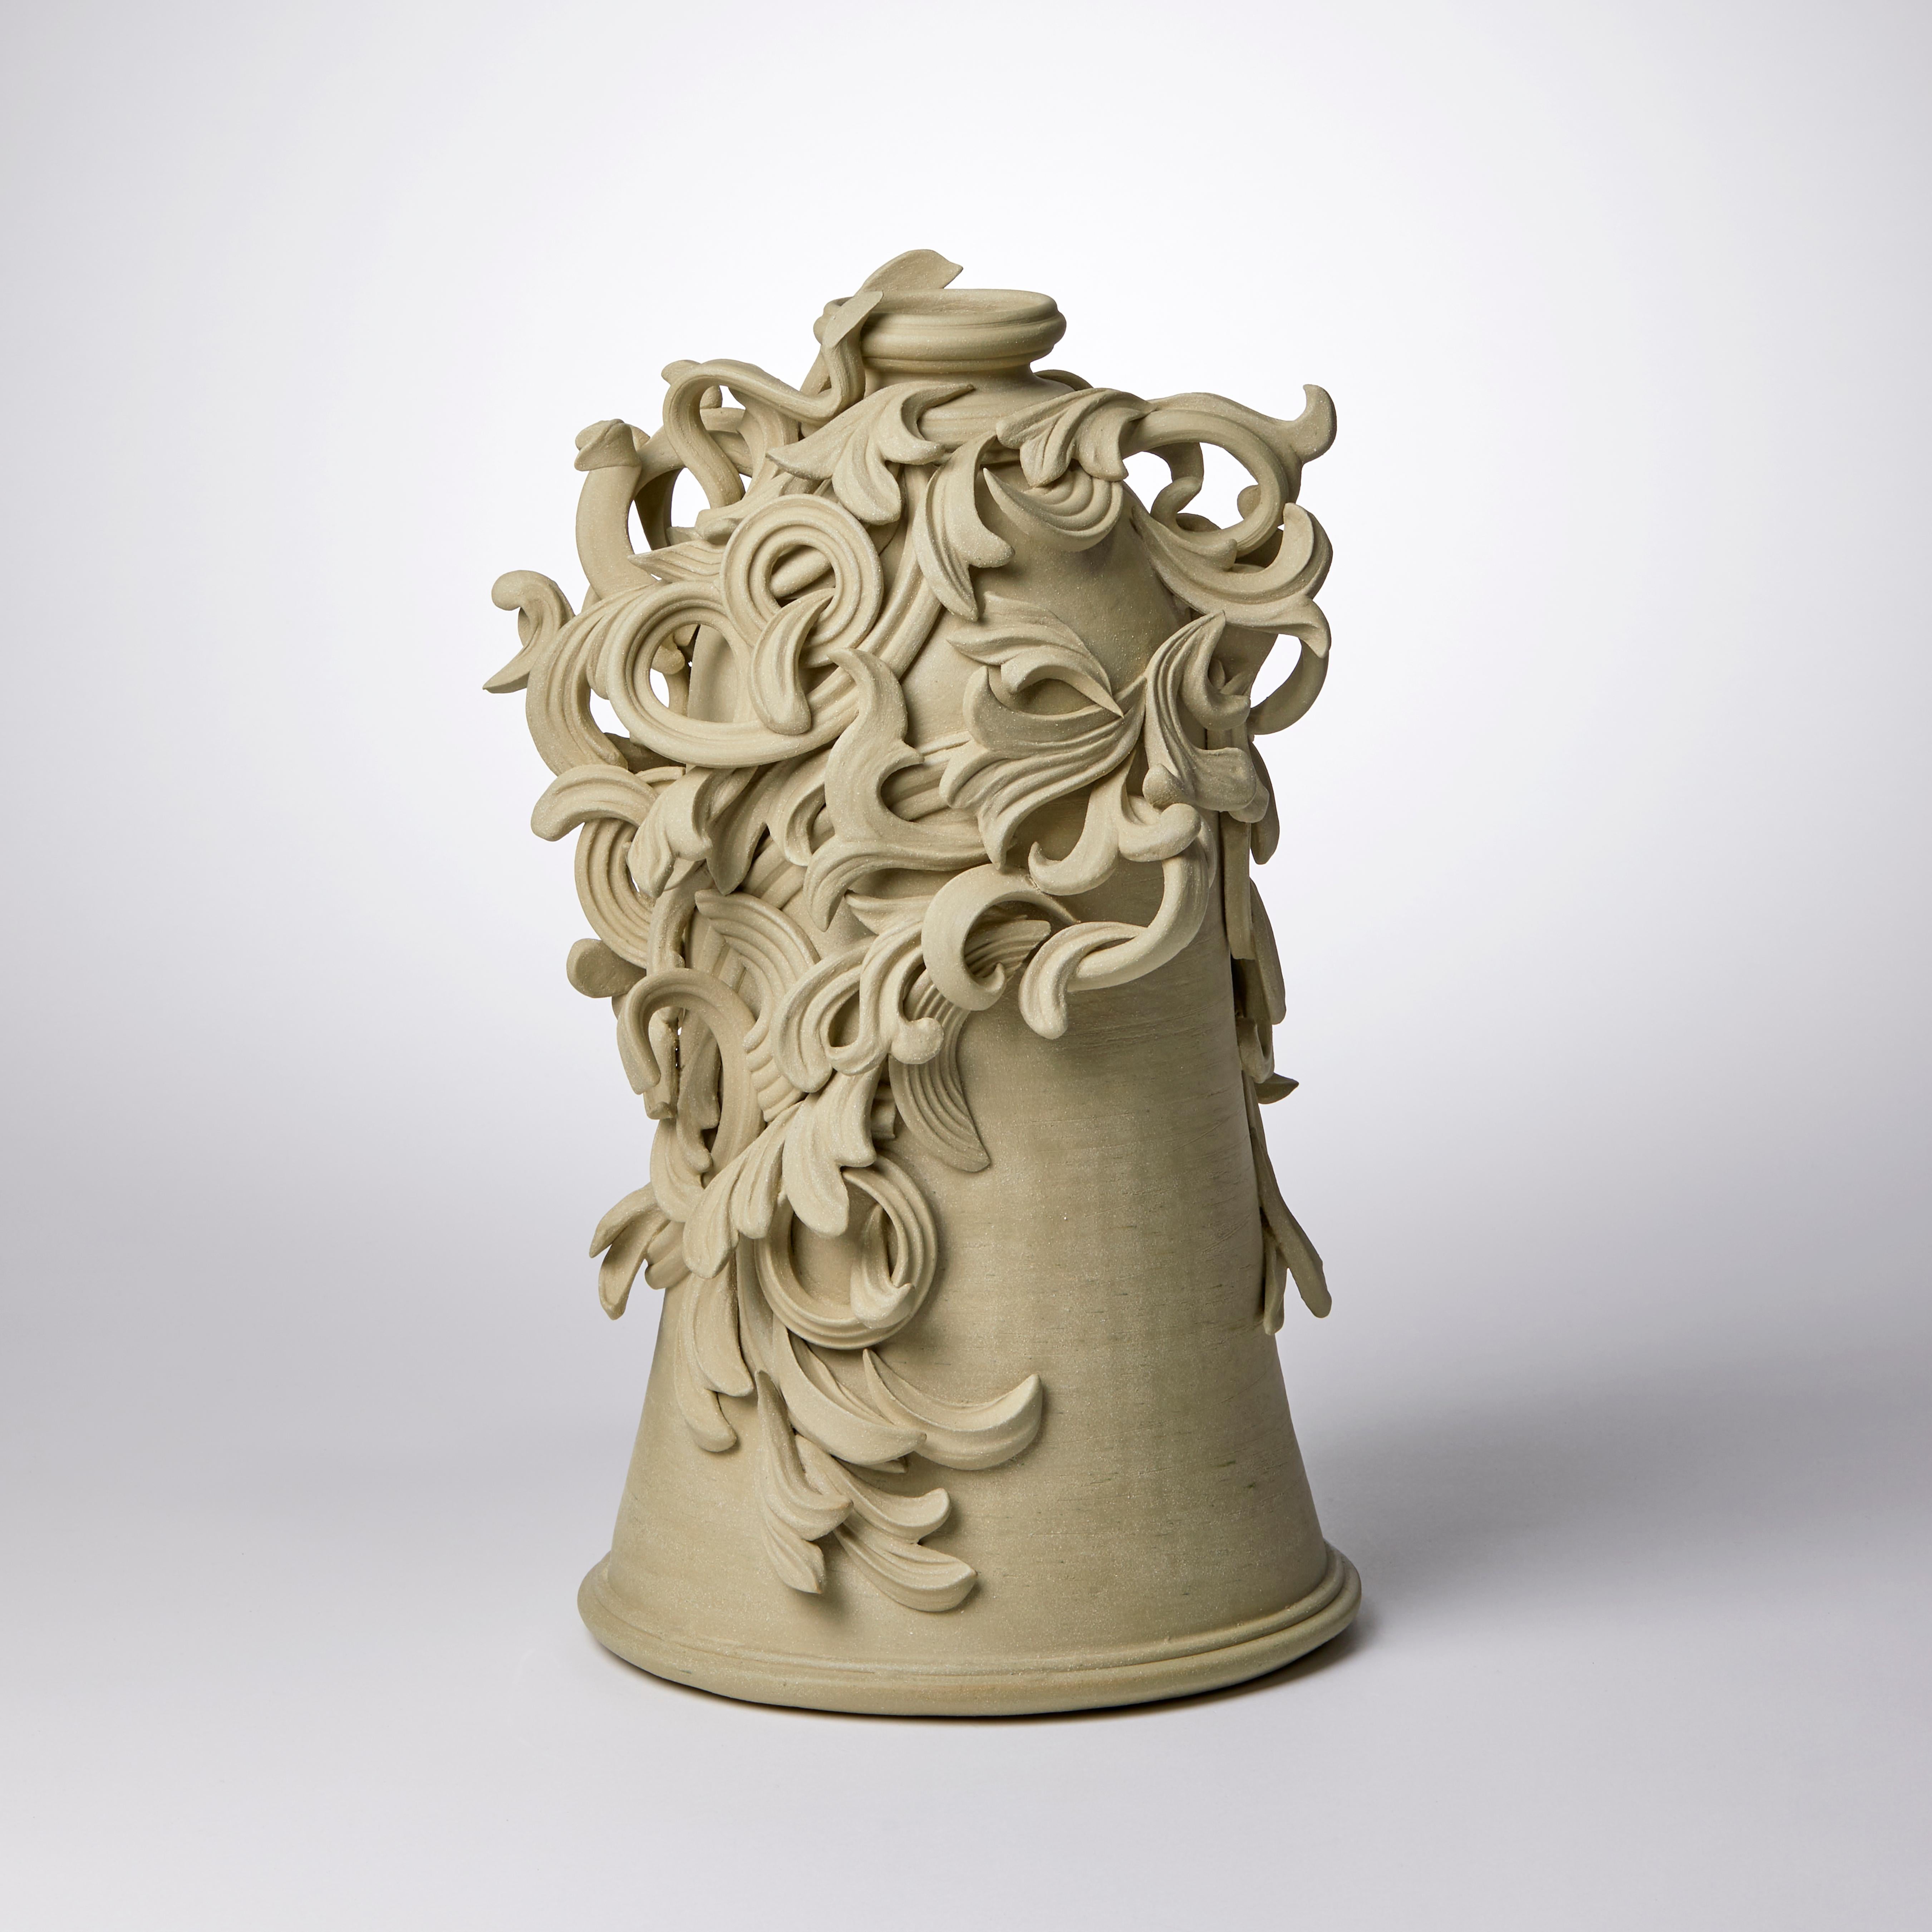 Vari Capitelli VII is a unique handmade colored stoneware ceramic sculptural vase in soft ochre green by the British artist Jo Taylor. The central form has been thrown on the potter's wheel and also hand-built, then adorned with architectural